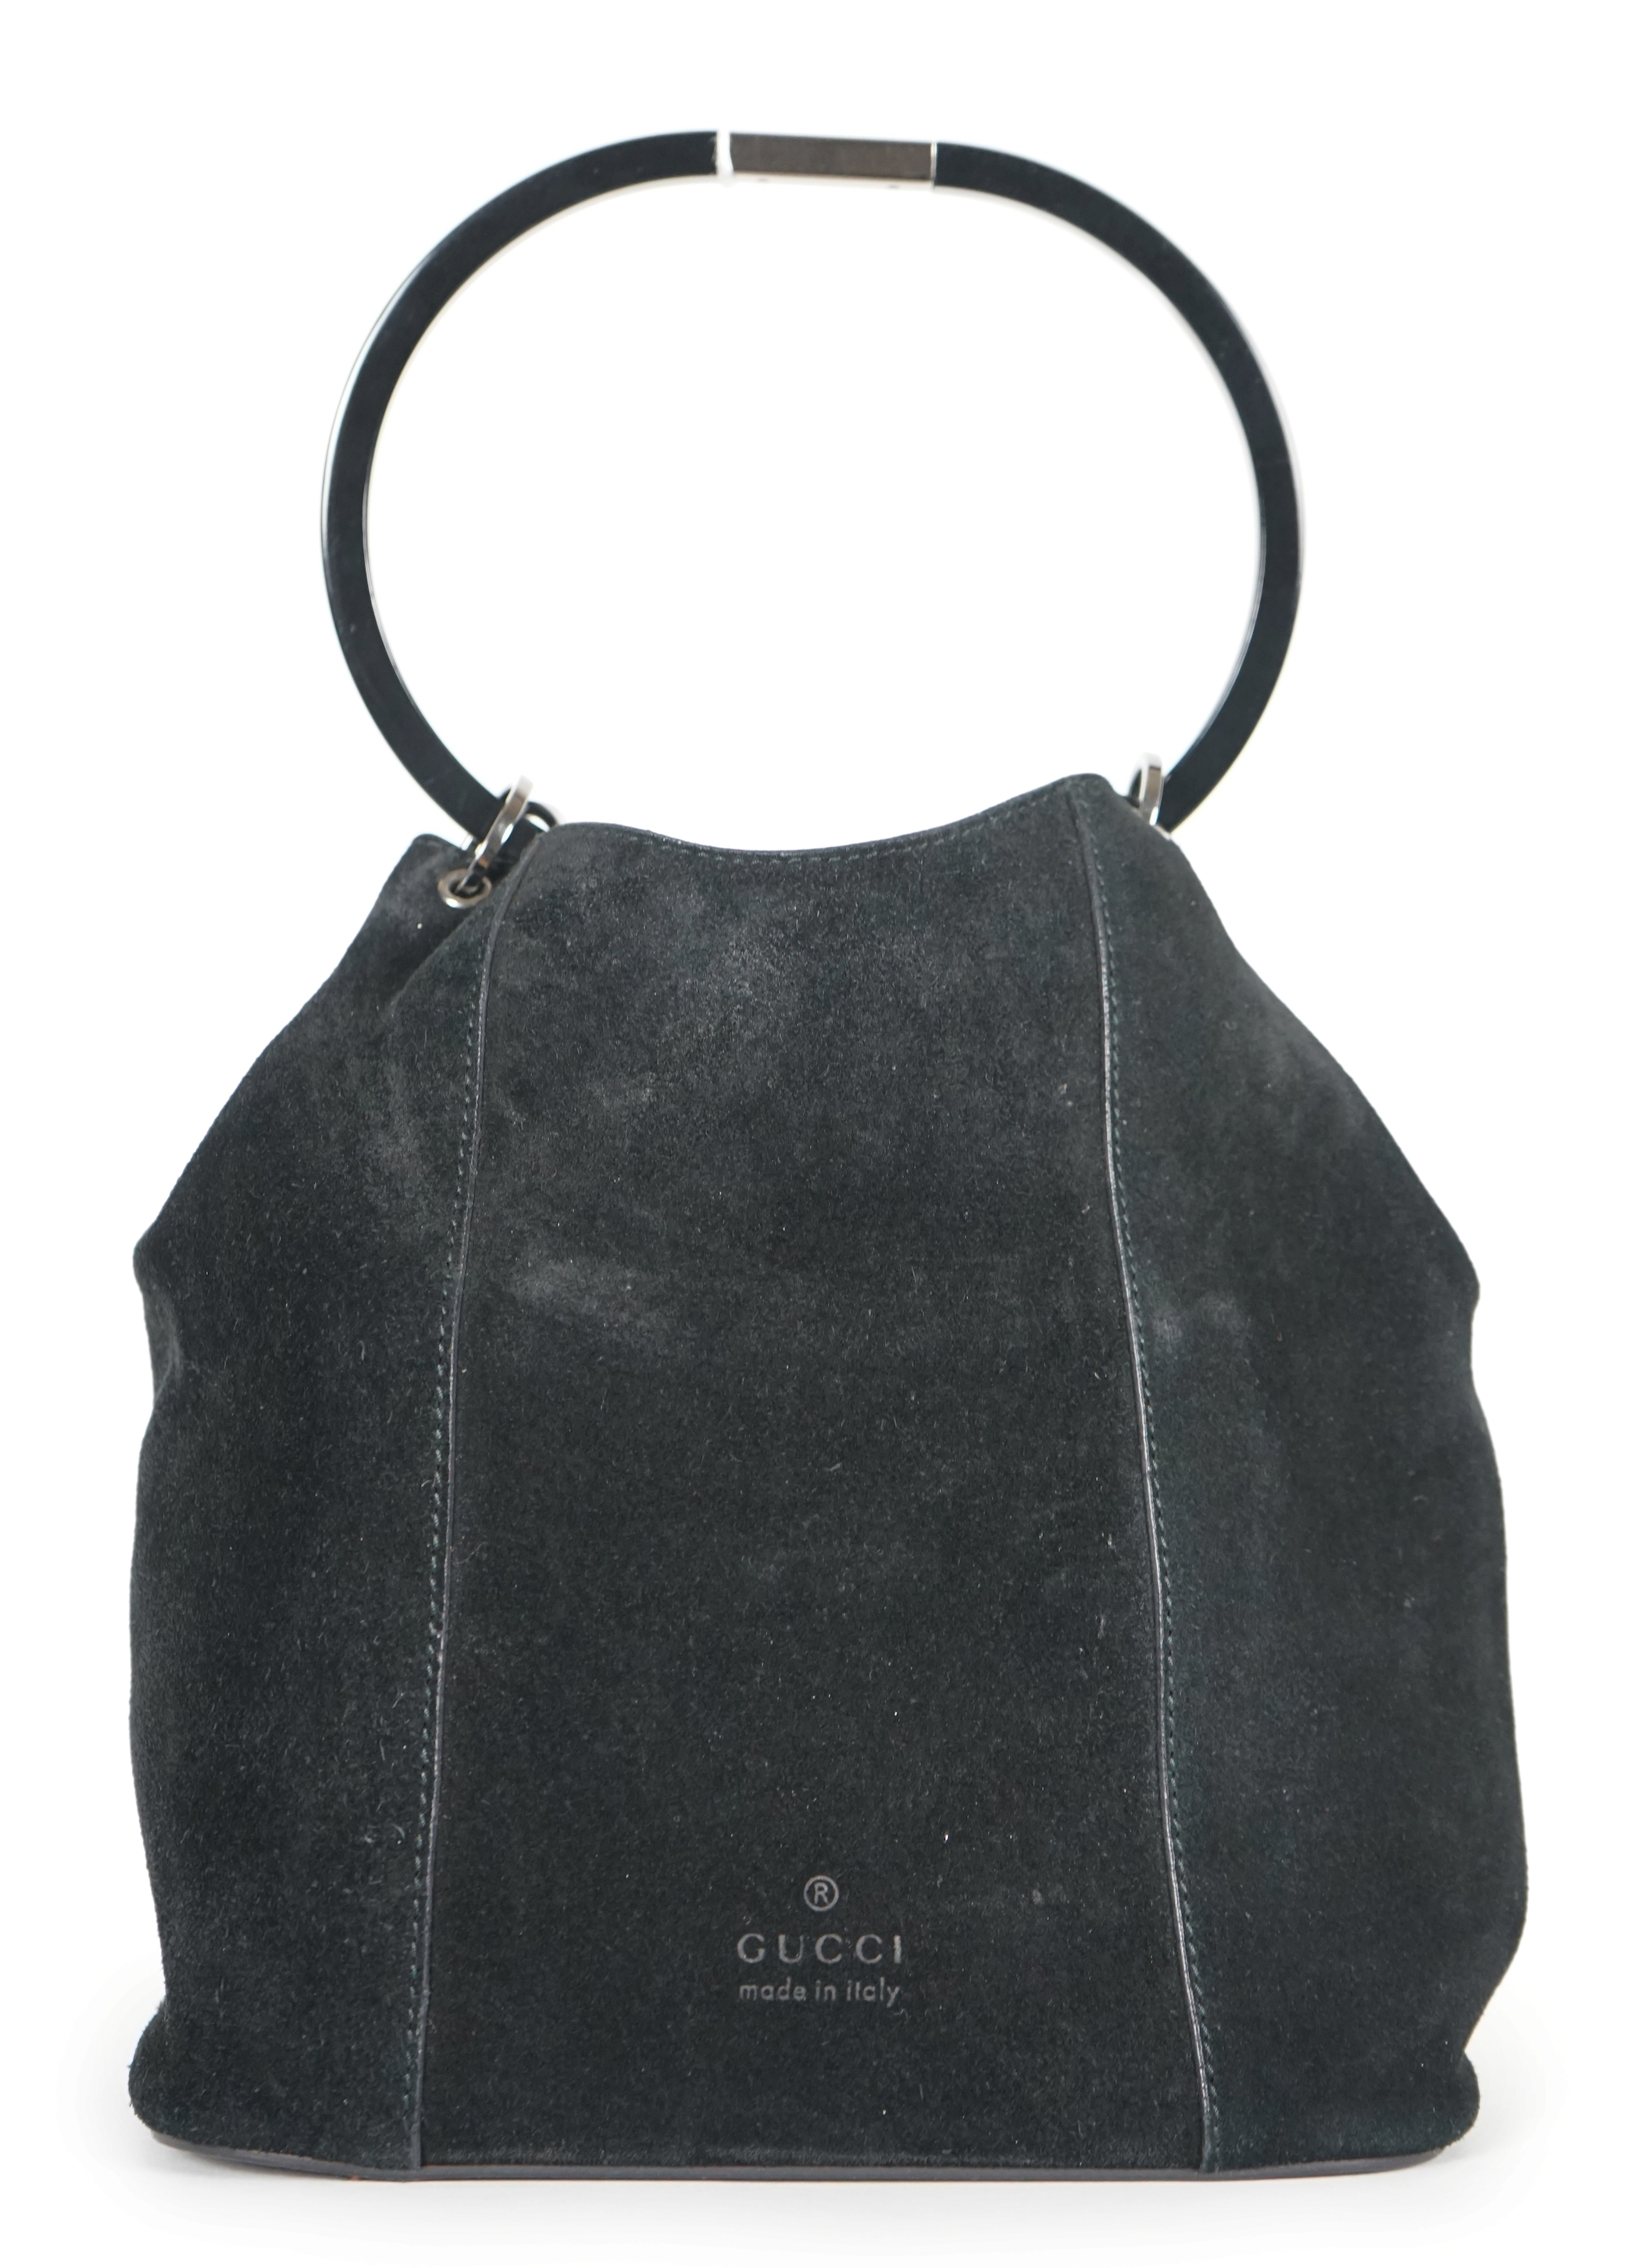 A vintage Gucci black Tom Ford era suede handbag, with dust bag, width 21cm, height overall 35cm, depth 11cm, Please note this lot attracts an additional import tax of 20% on the hammer price